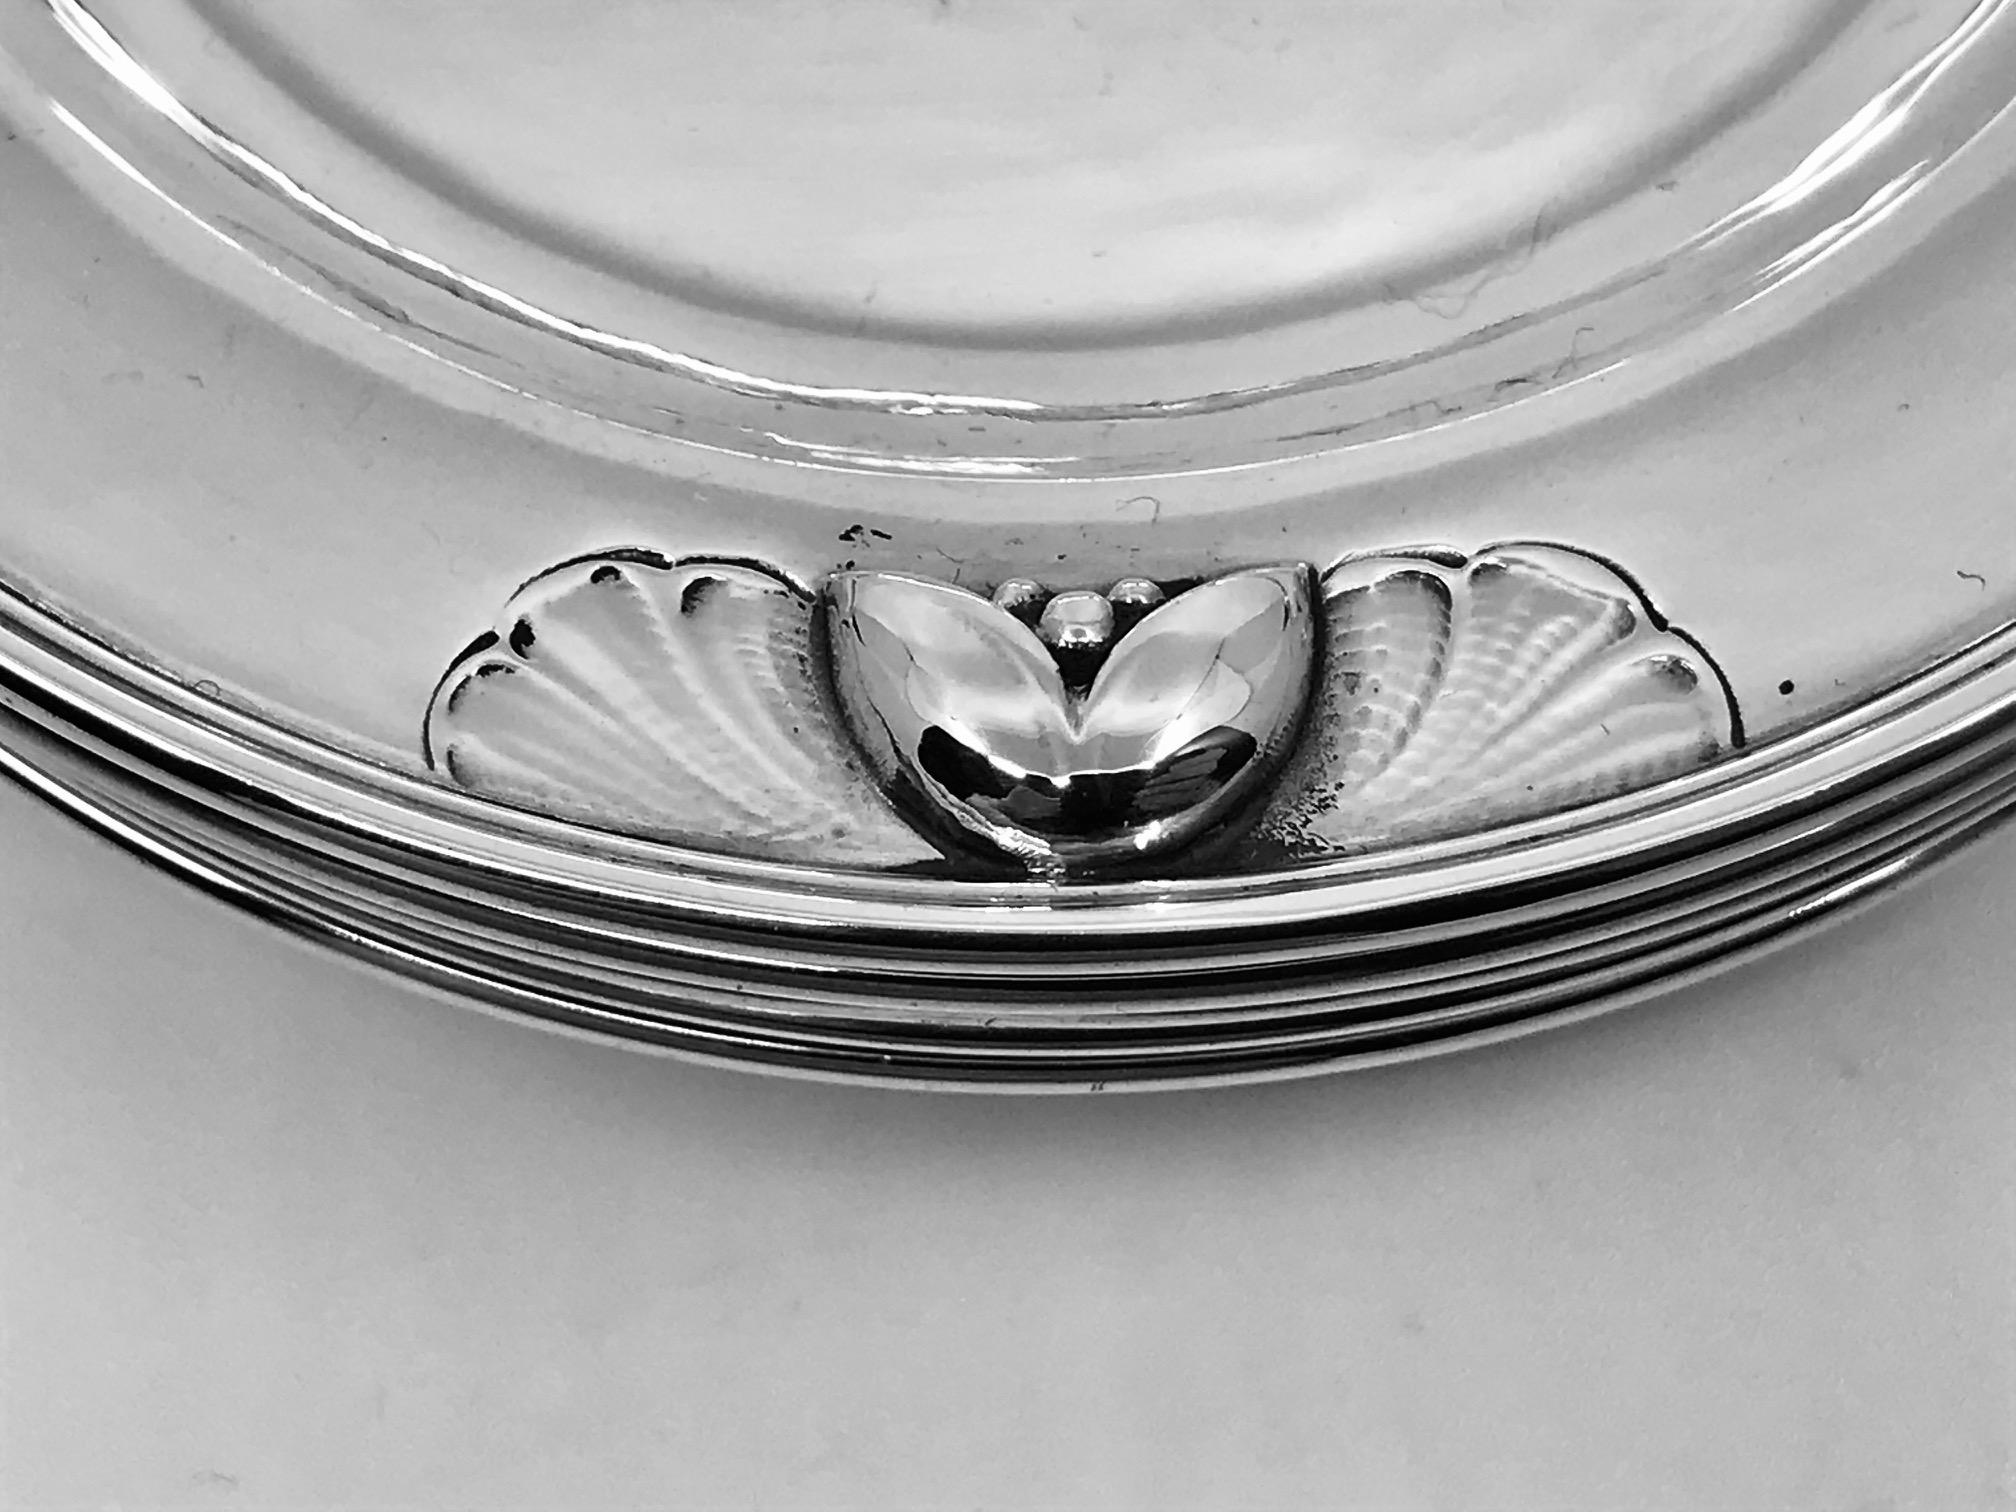 This is a set of six sterling silver Georg Jensen butter plates, design #428A by Georg Jensen.
Measure 4? (10cm) in diameter.
All with matching vintage Georg Jensen hallmarks from the 1930s.